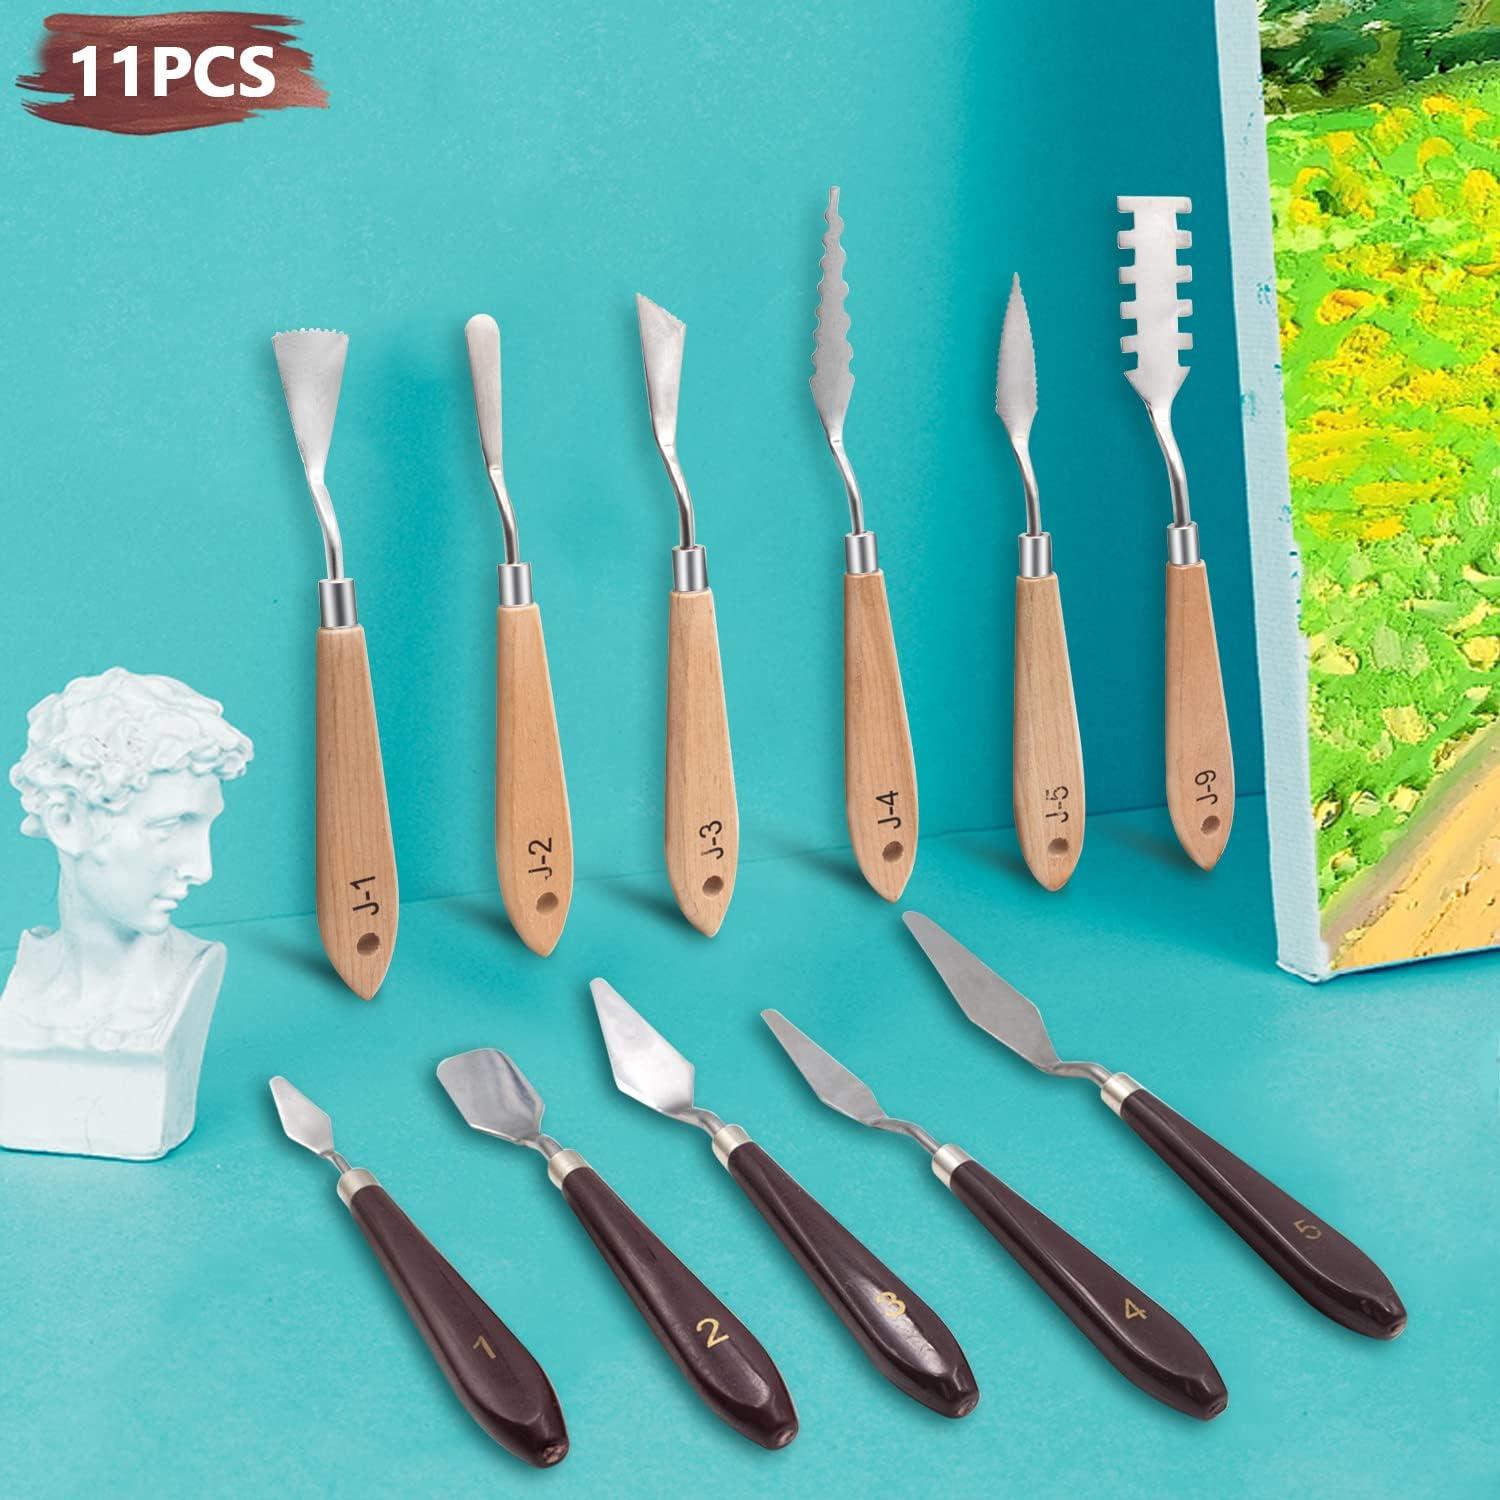 Painting Knives Set, 11 Pcs Palette Knife for Acrylic Painting